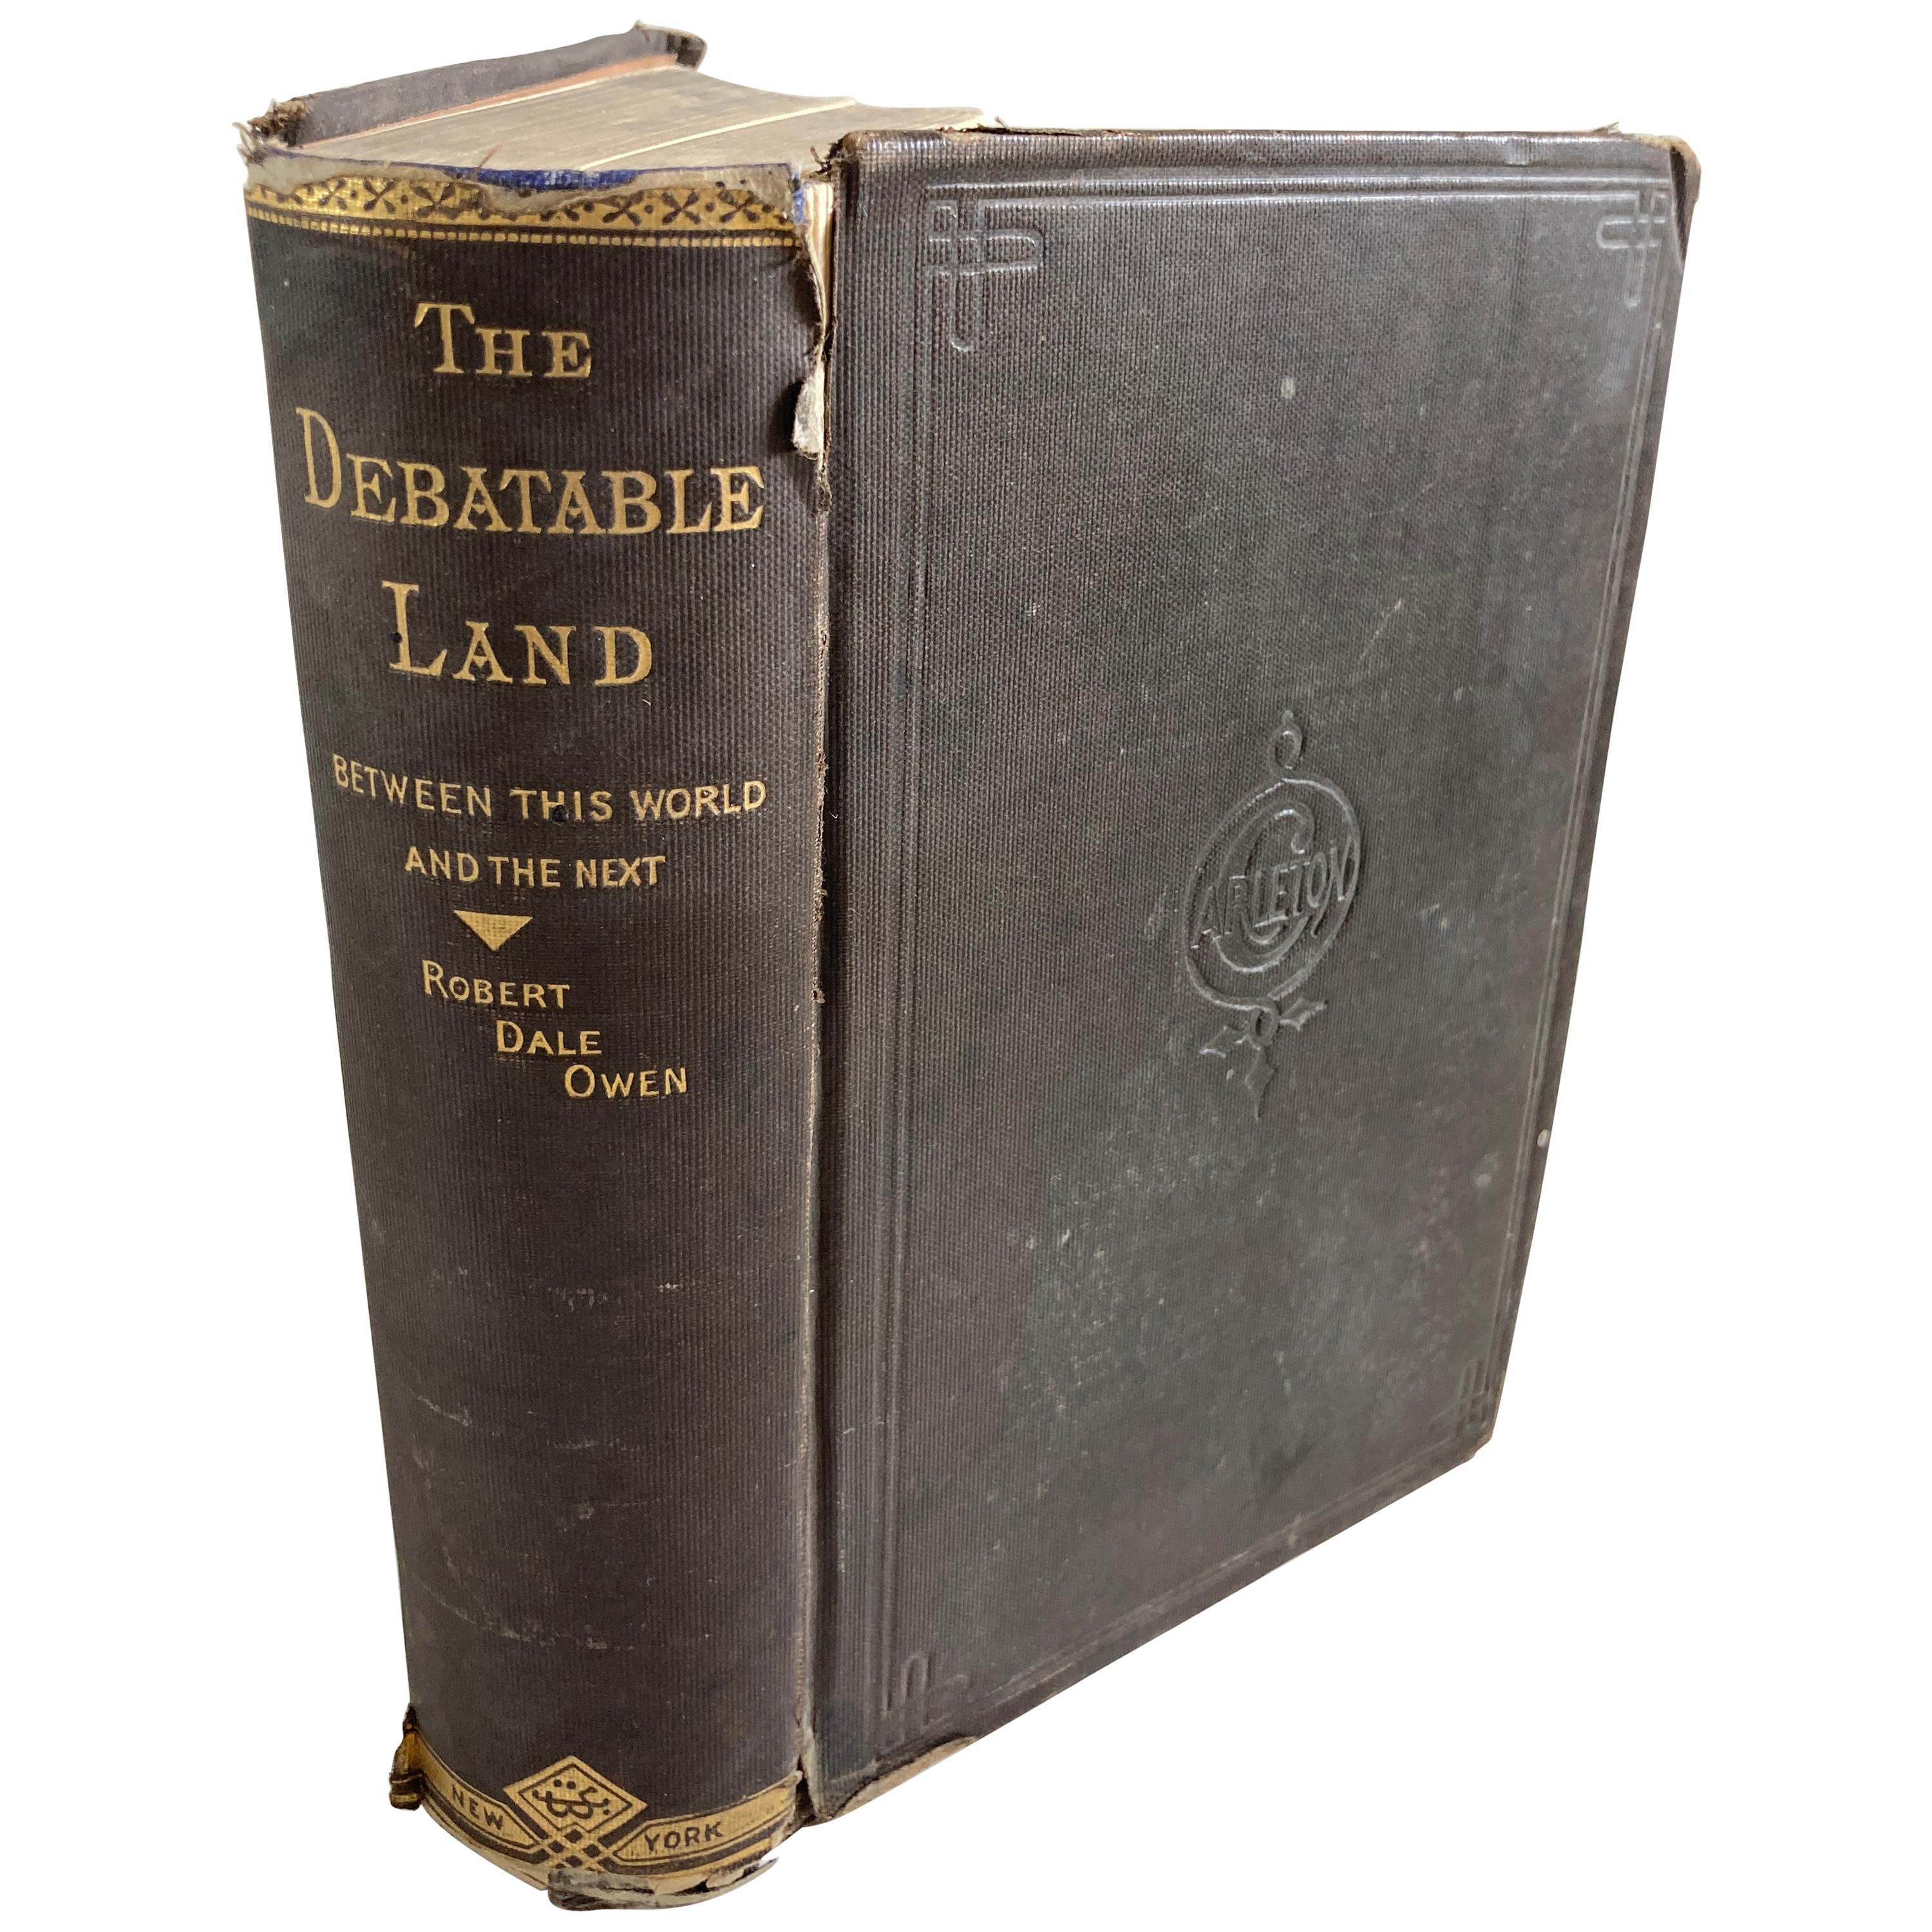 The Debatable Land Between This World and the Next Book by Robert Dale Owen